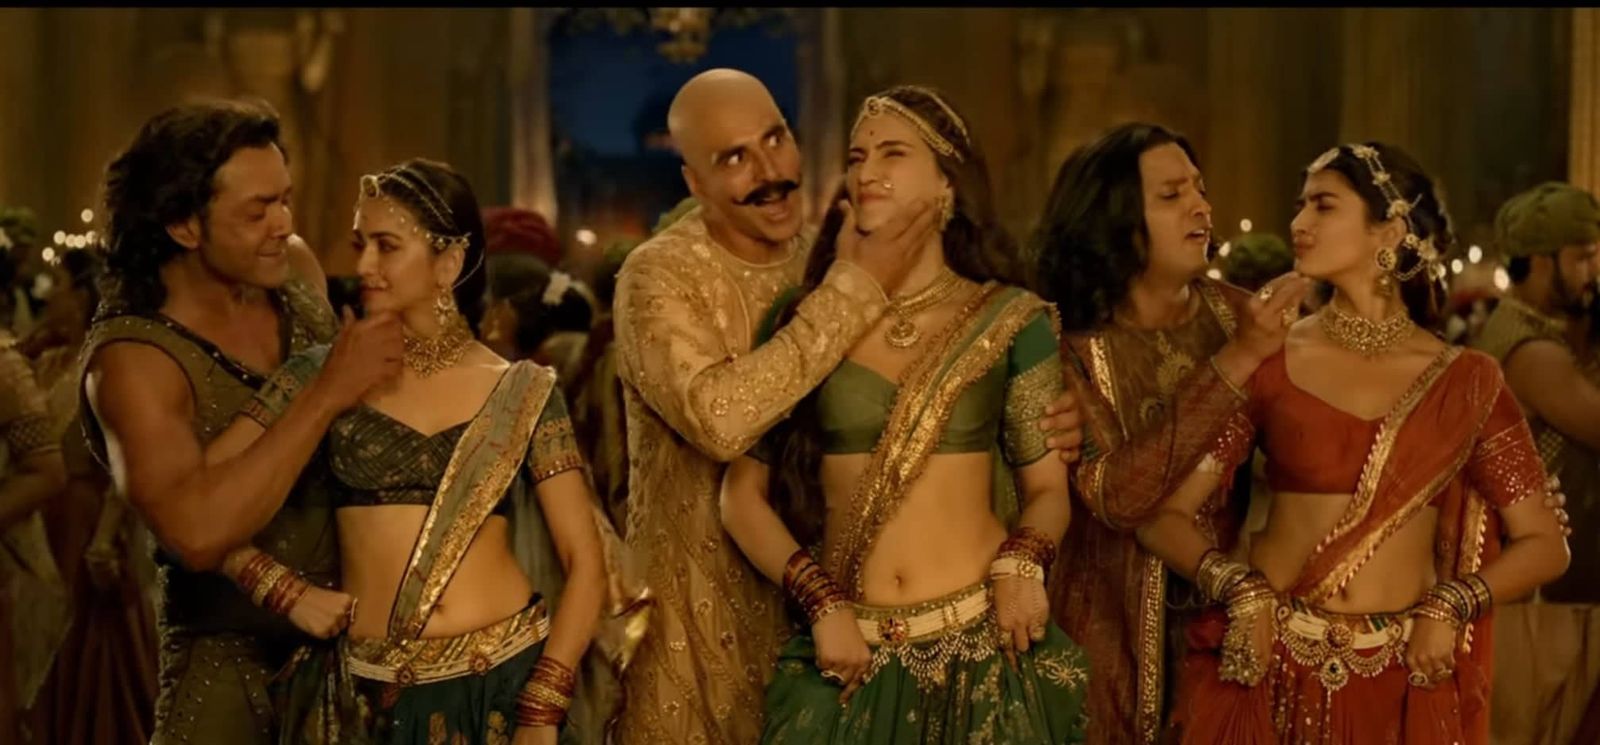 Housefull 4 Trailer: The Reincarnation Comedy Is Yet Another Crass And Cringy Attempt At Making People Laugh